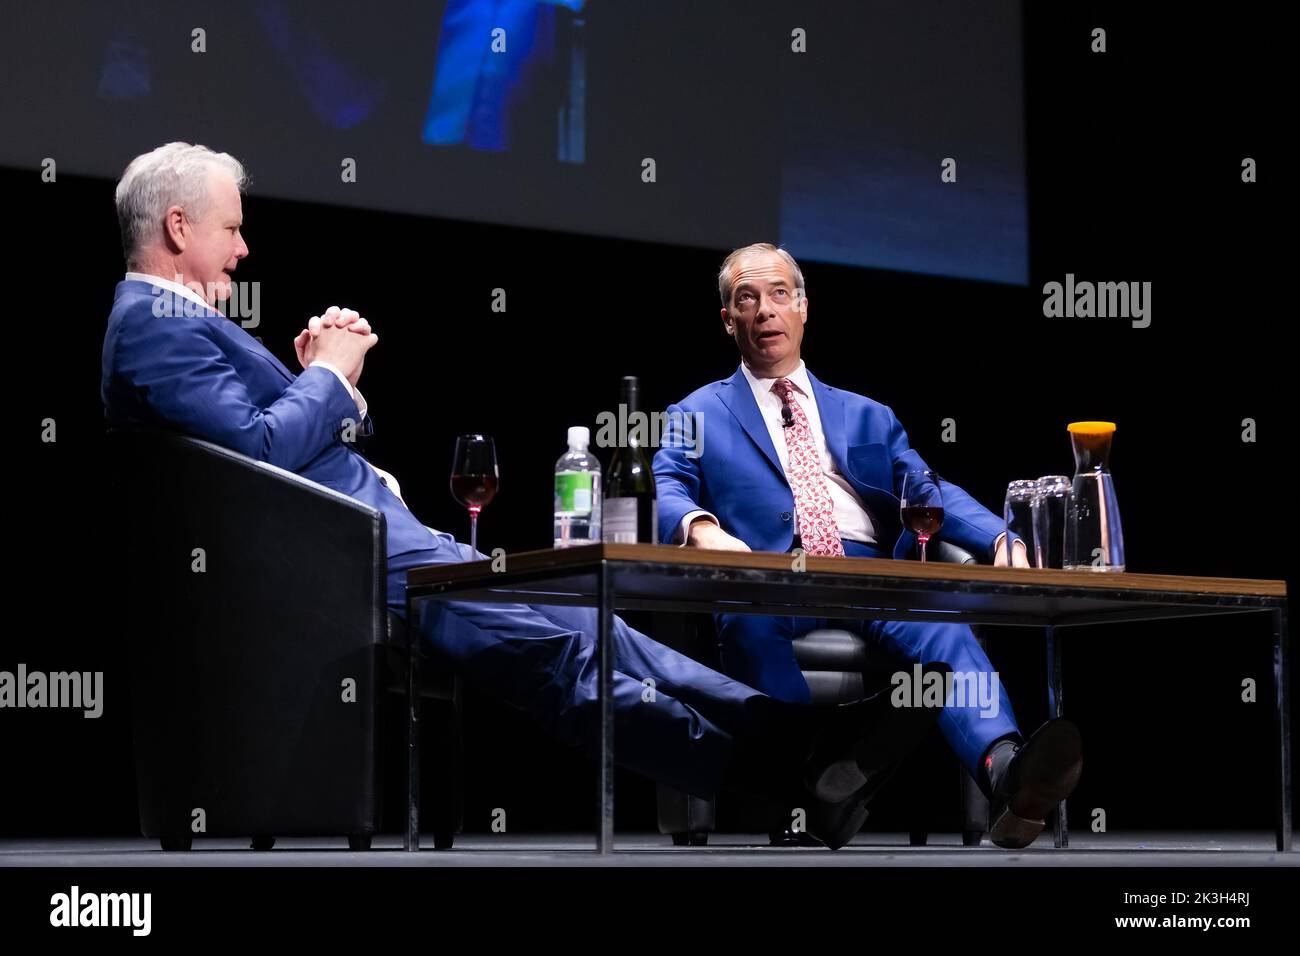 Melbourne, Australia, 26 September, 2022. Nigel Farage and Ross Cameron discuss politics in front of a sold out audience during An Evening With Nigel Farage at The Melbourne Convention and Exhibition Centre on September 26, 2022 in Melbourne, Australia. Credit: Dave Hewison/Speed Media/Alamy Live News Stock Photo